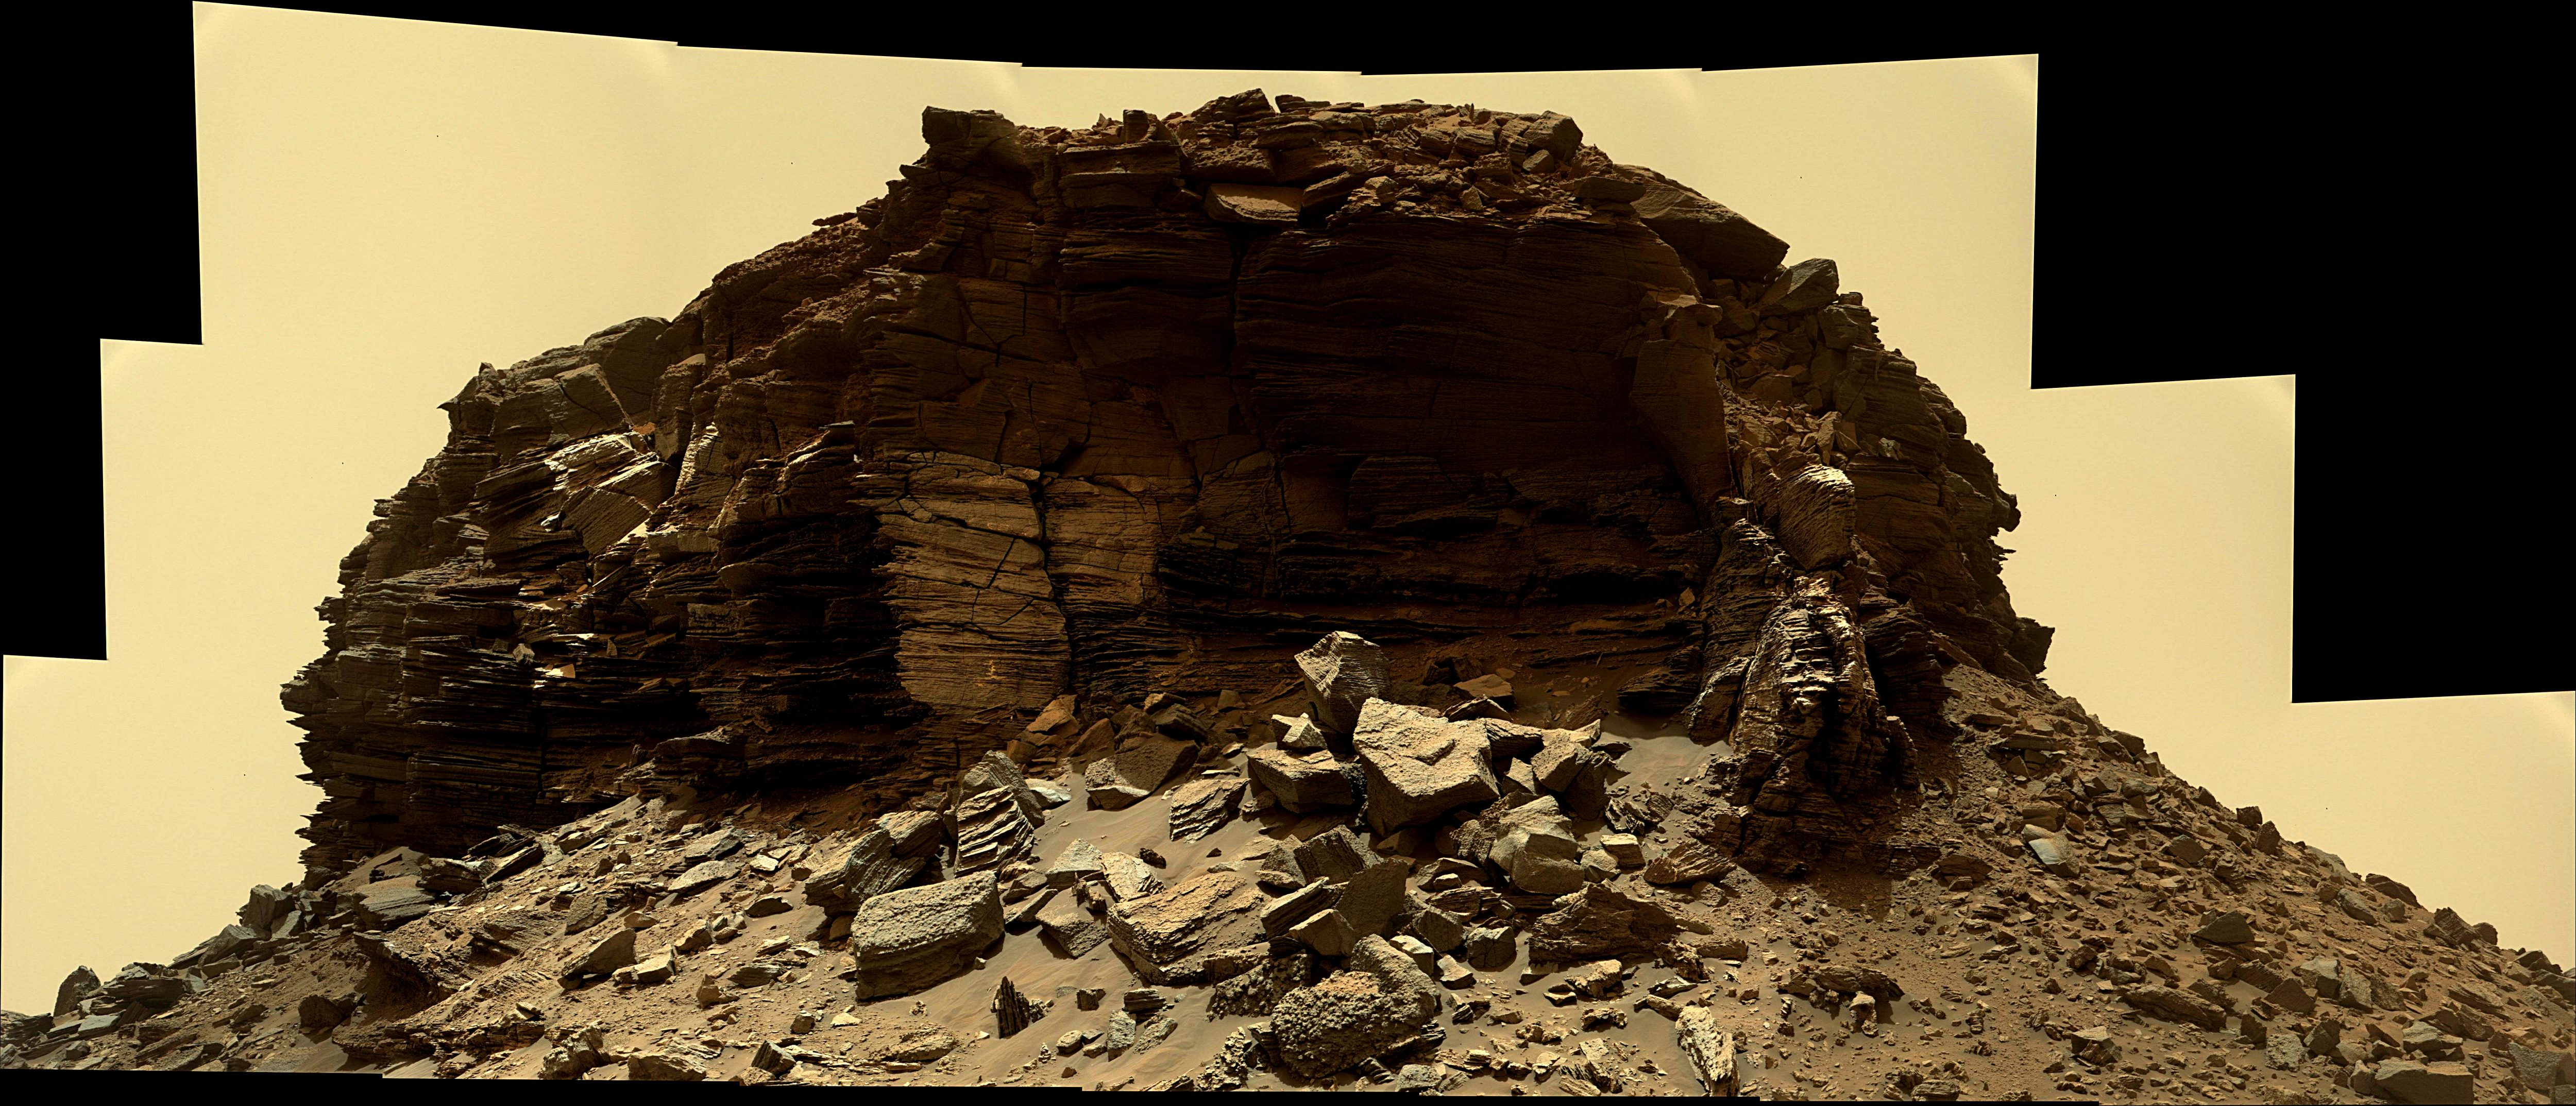 panoramic-curiosity-rover-view-1e-sol-1454-was-life-on-mars